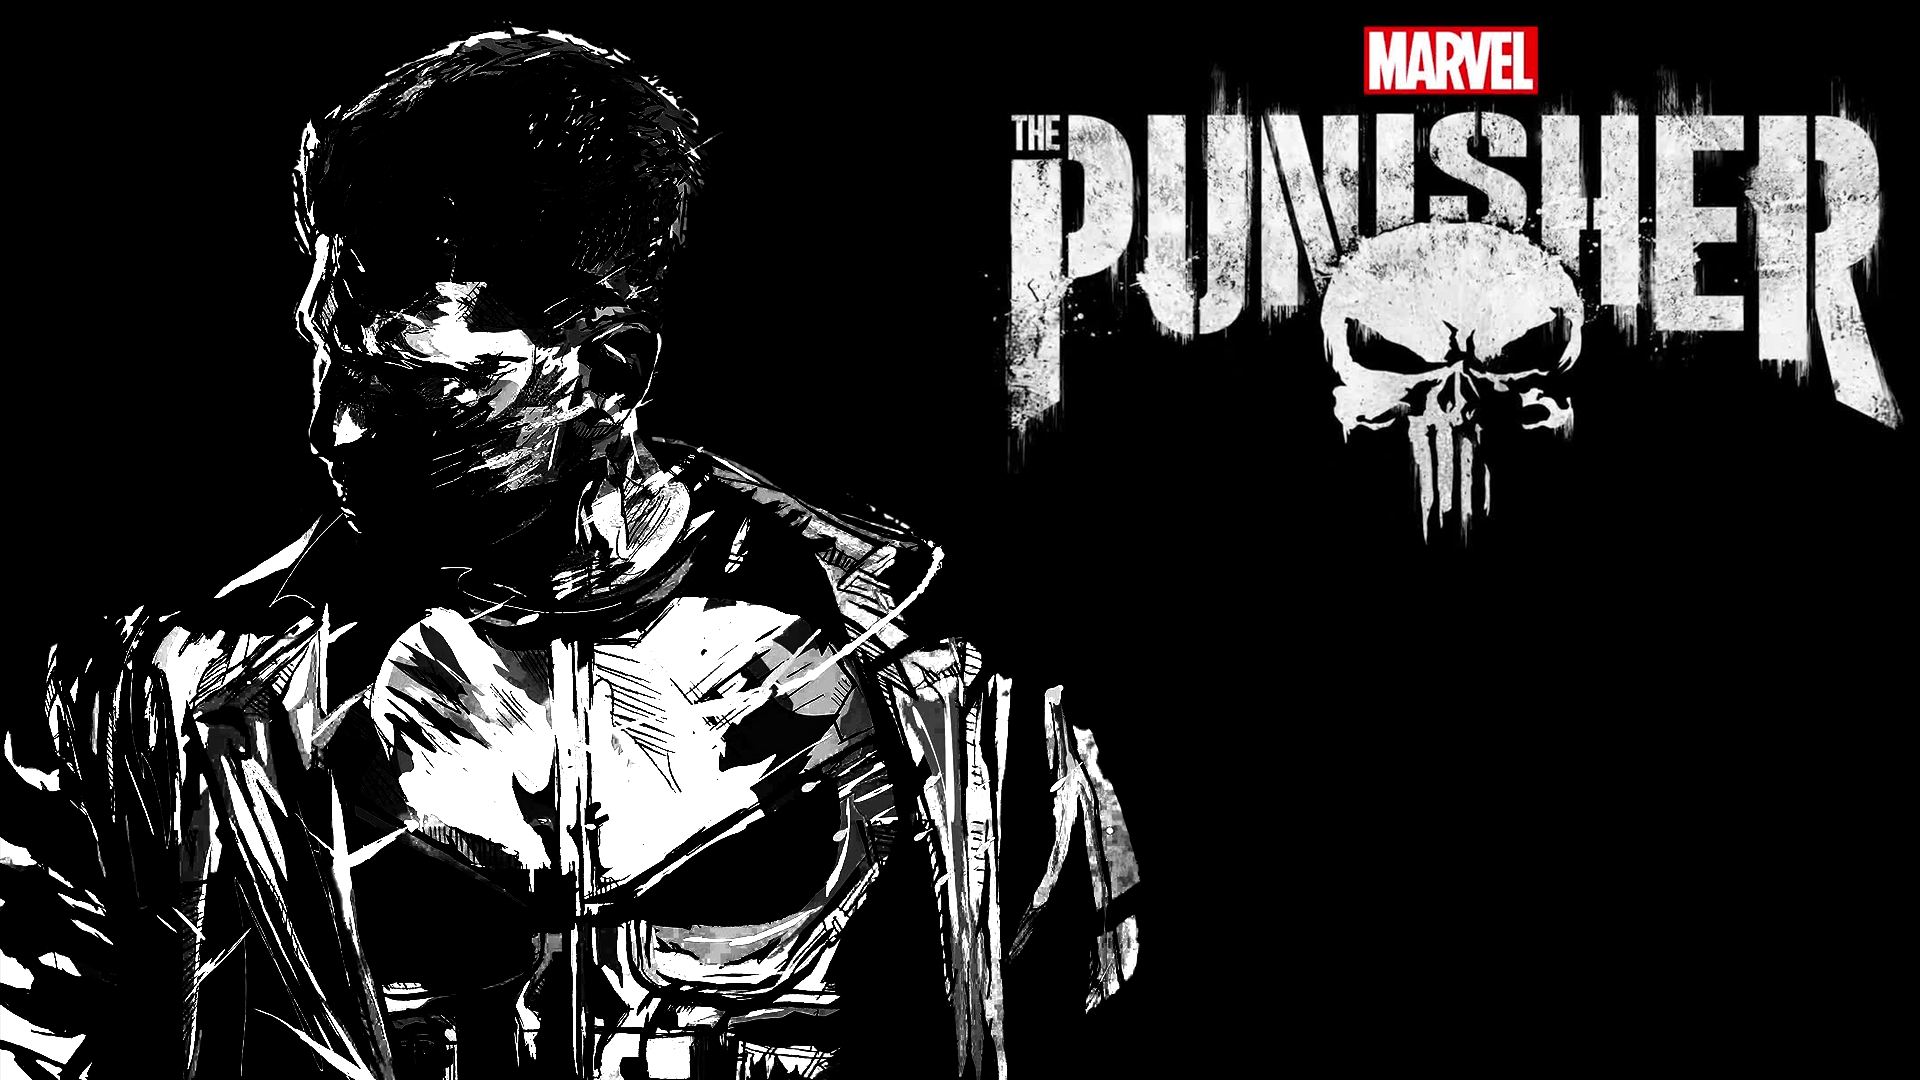 The Punisher Wallpapers 4k Hd The Punisher Backgrounds On Wallpaperbat